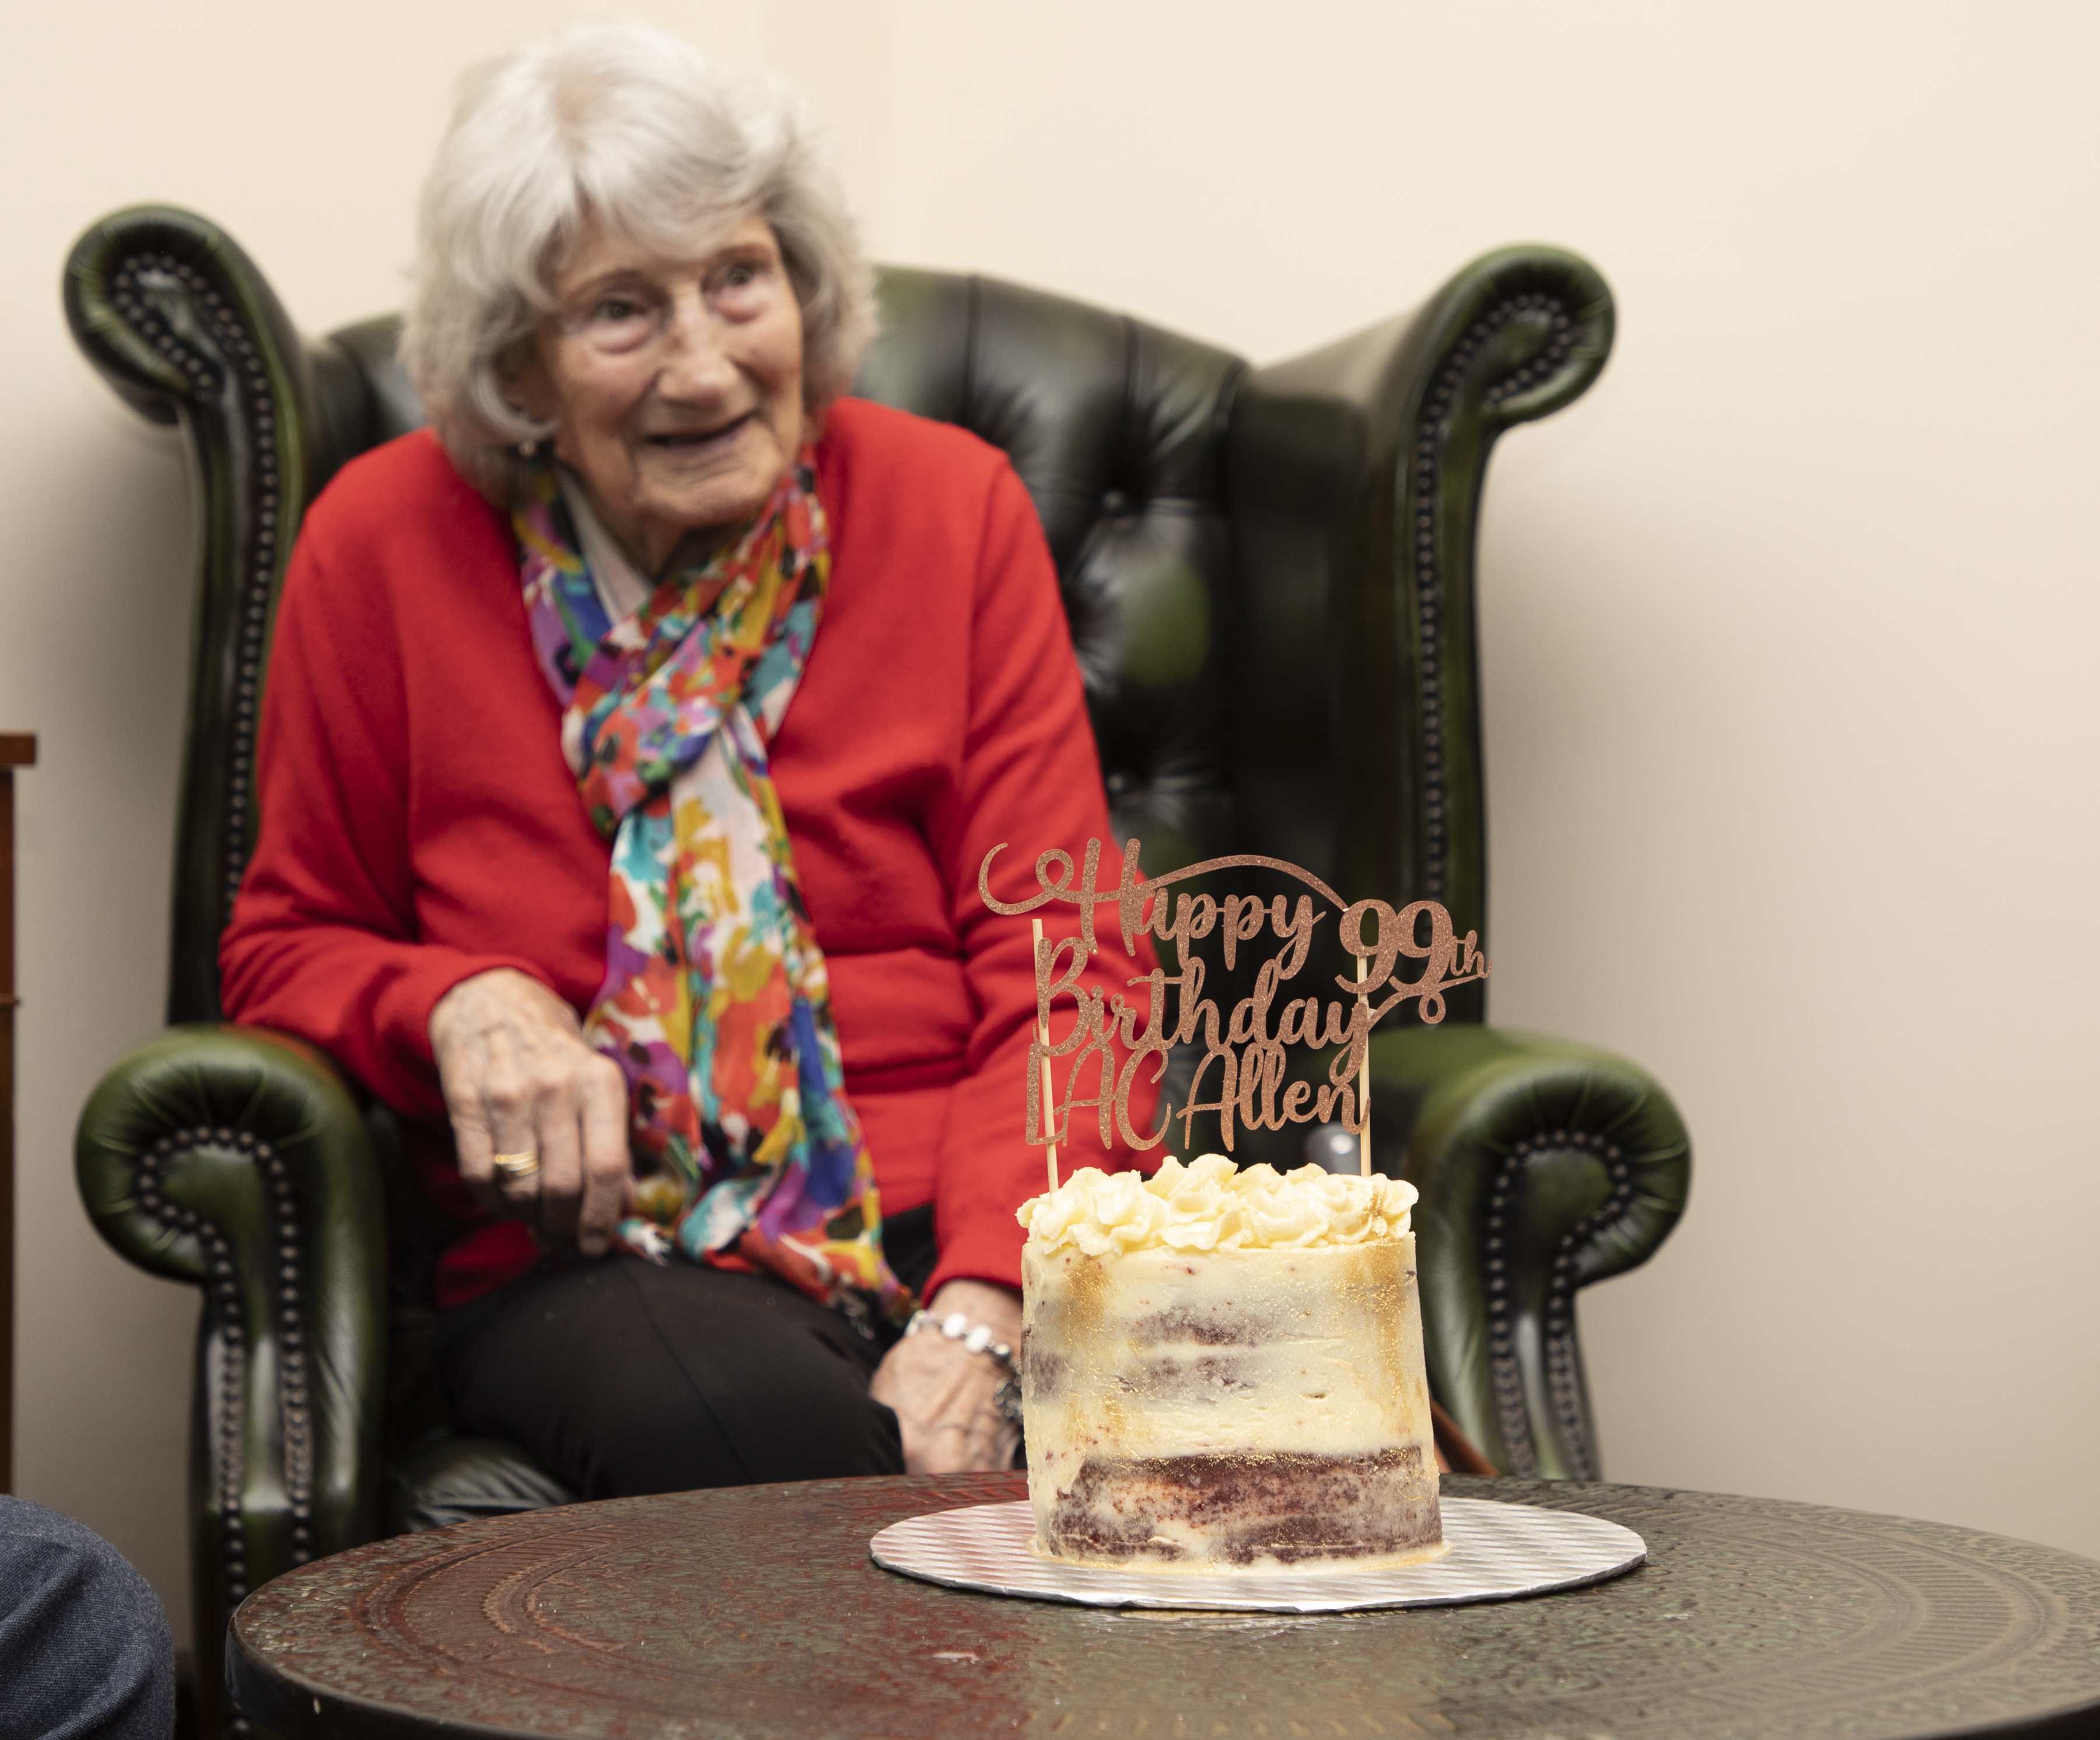 Image shows Veteran sitting in an armchair with birthday cake on table.